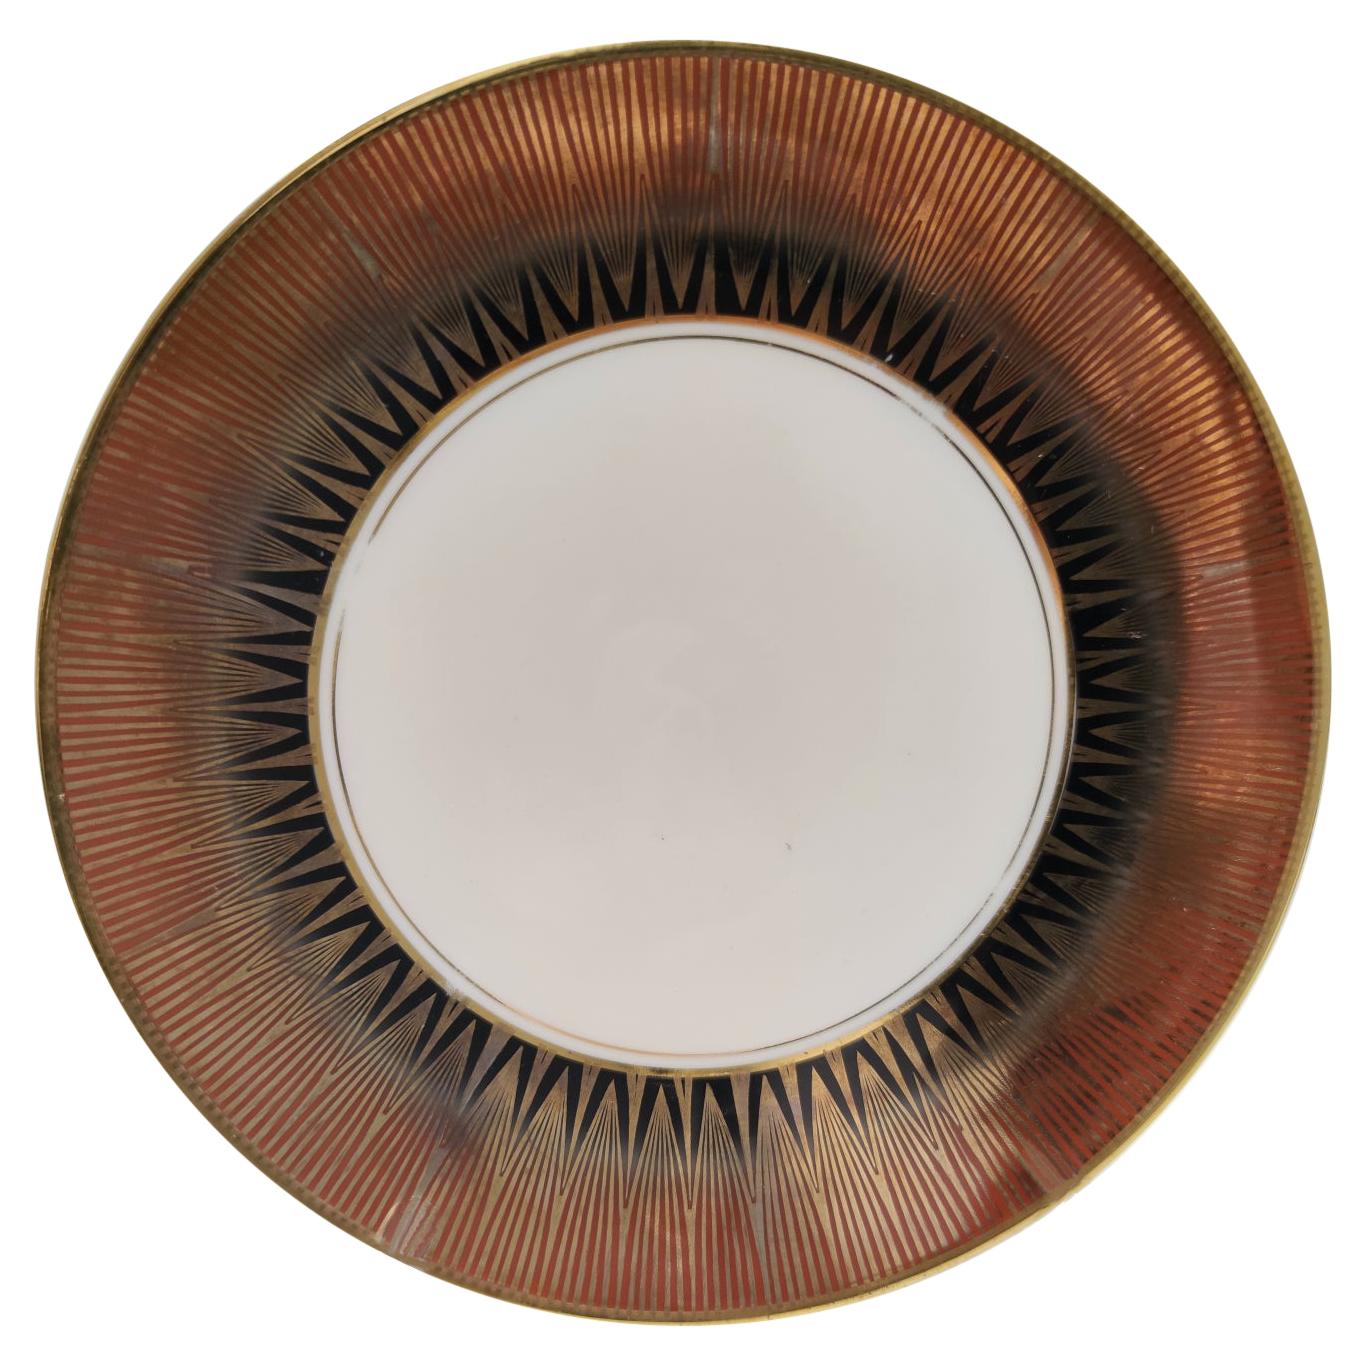 1950s. 
This is a beautiful gold porcelain dessert set by Johann Seltmann, Bavaria, 1950s. 
The set features 12 plates for serving and a cake plate. 
In person the decoration looks shinier and mirror-like. 

Cake plate: 
diameter 30 cm

Serving